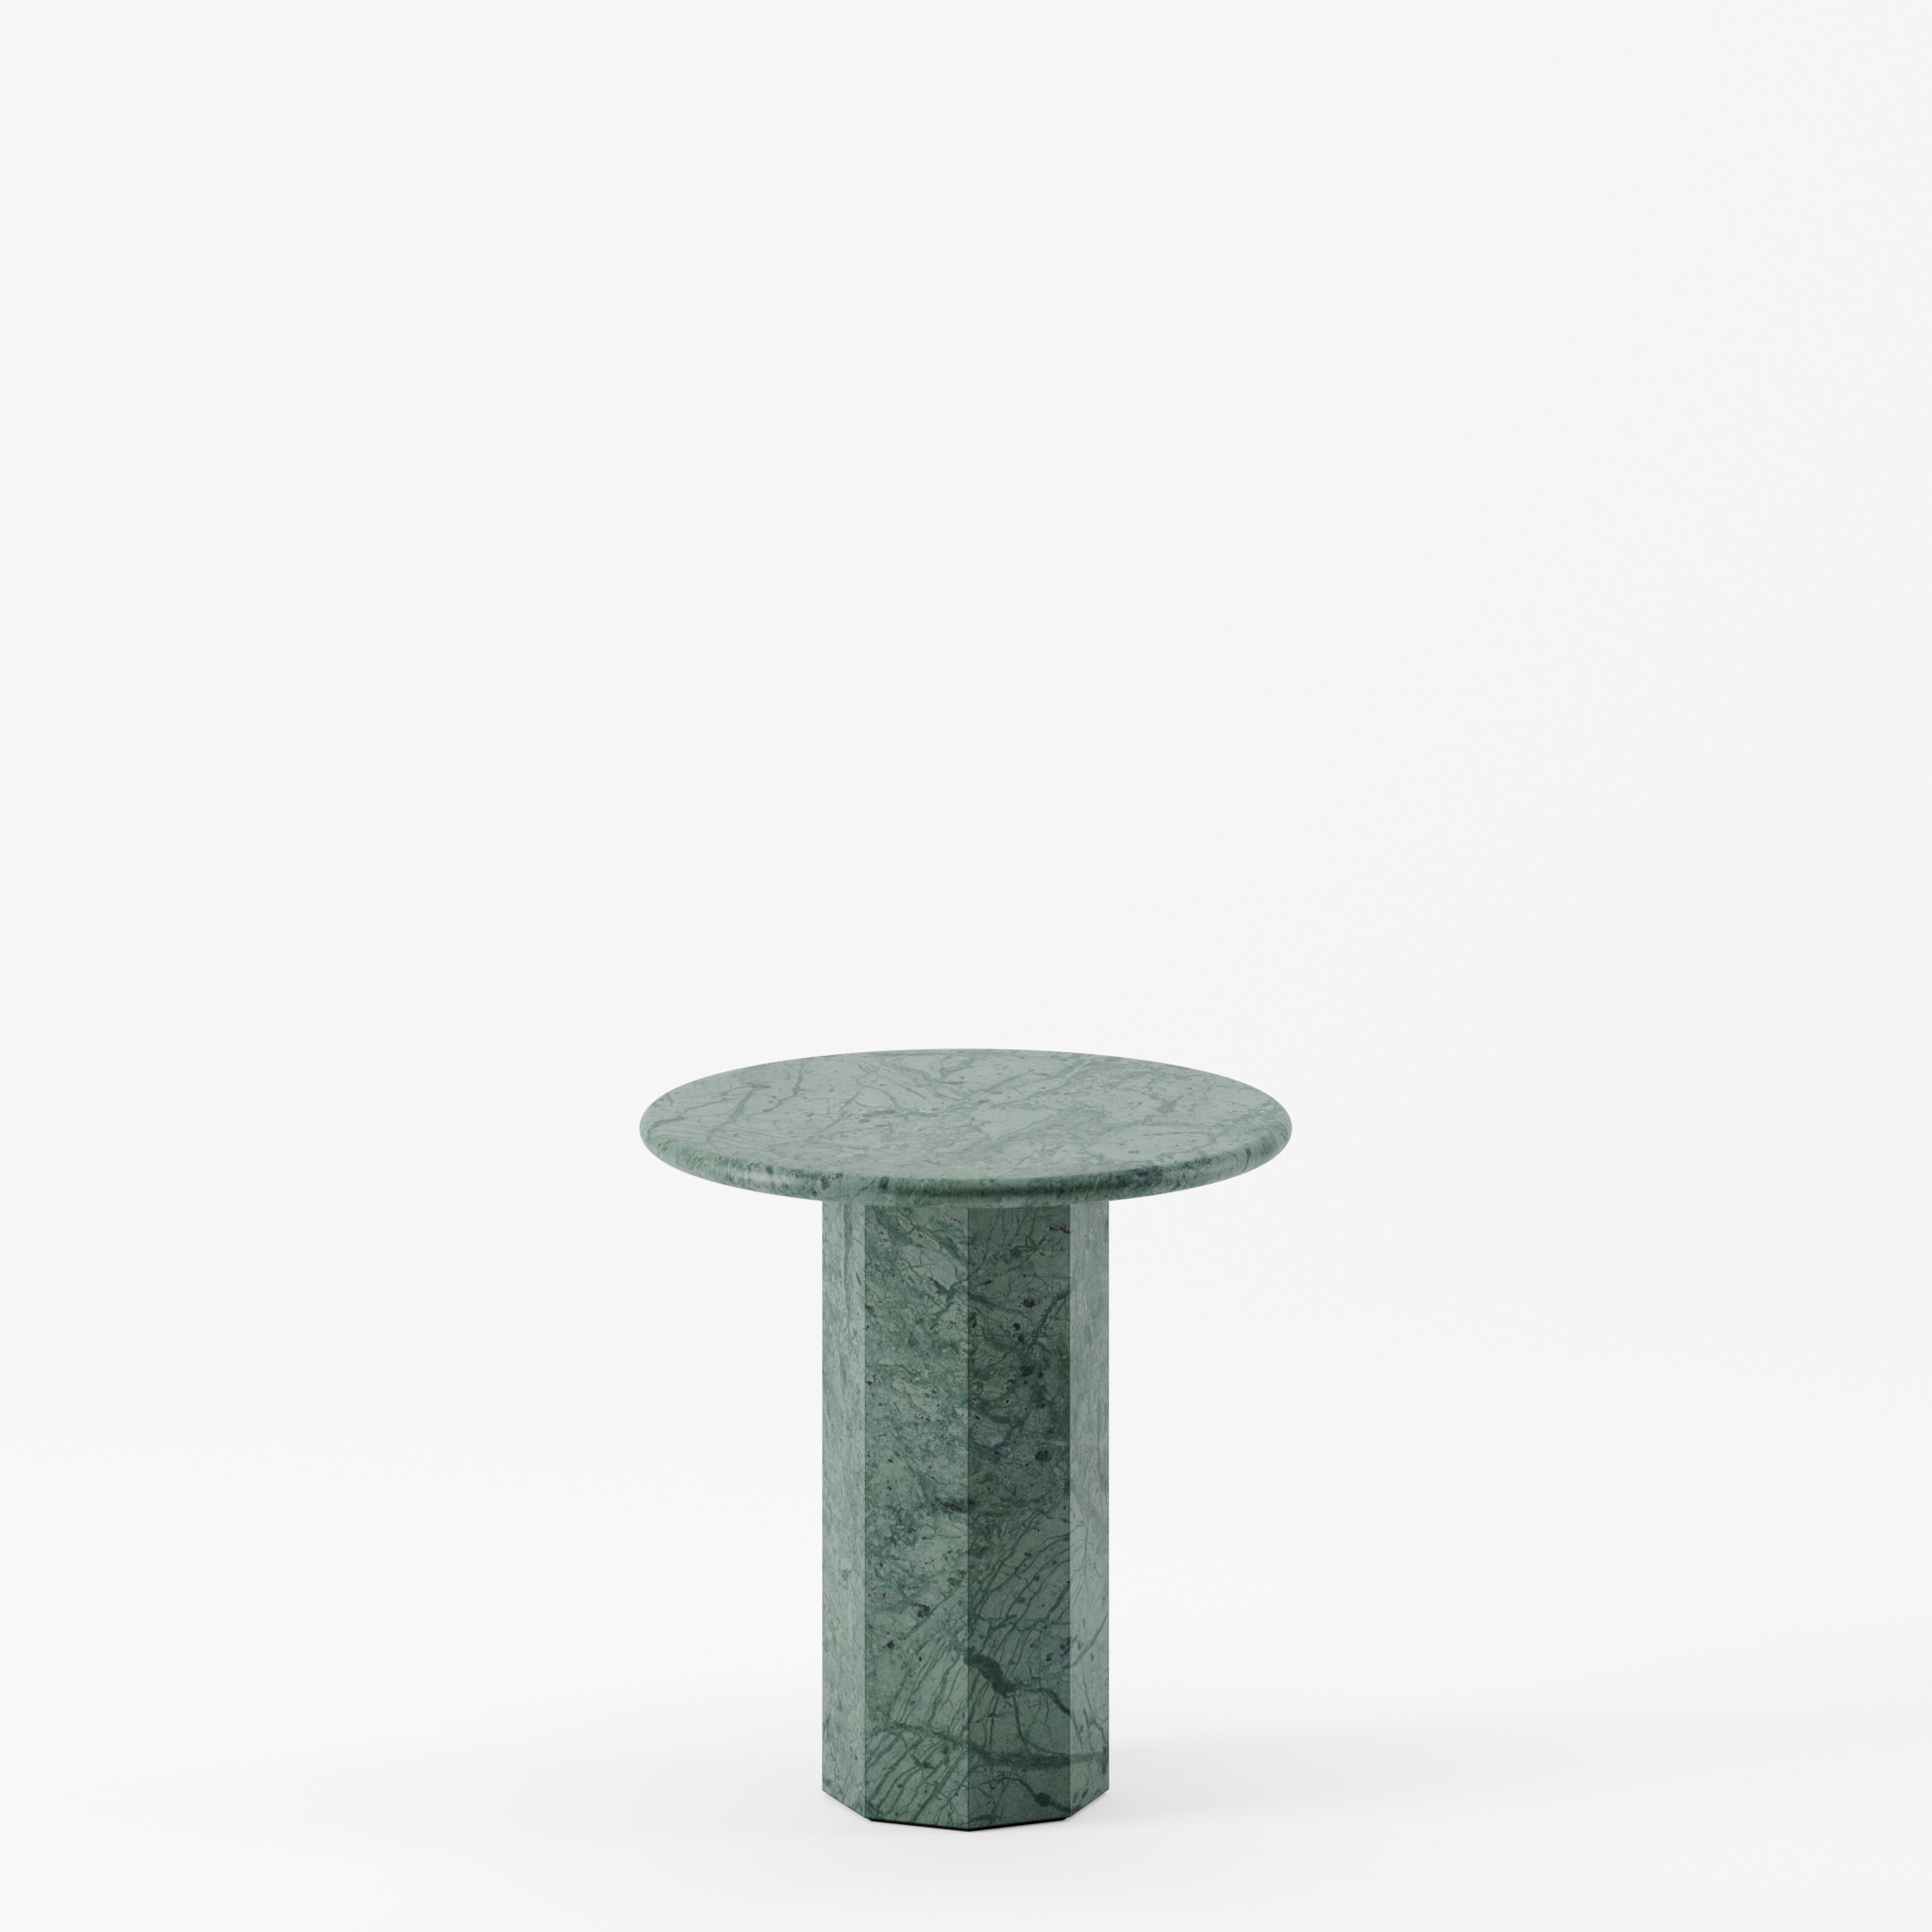 Exemplifying Lemon's unwavering commitment to elegance and artistry, the Ashby side table encapsulates the brand's ethos with perfection. Its magnificent design showcases the harmonious fusion of meticulous craftsmanship, timeless simplicity, and